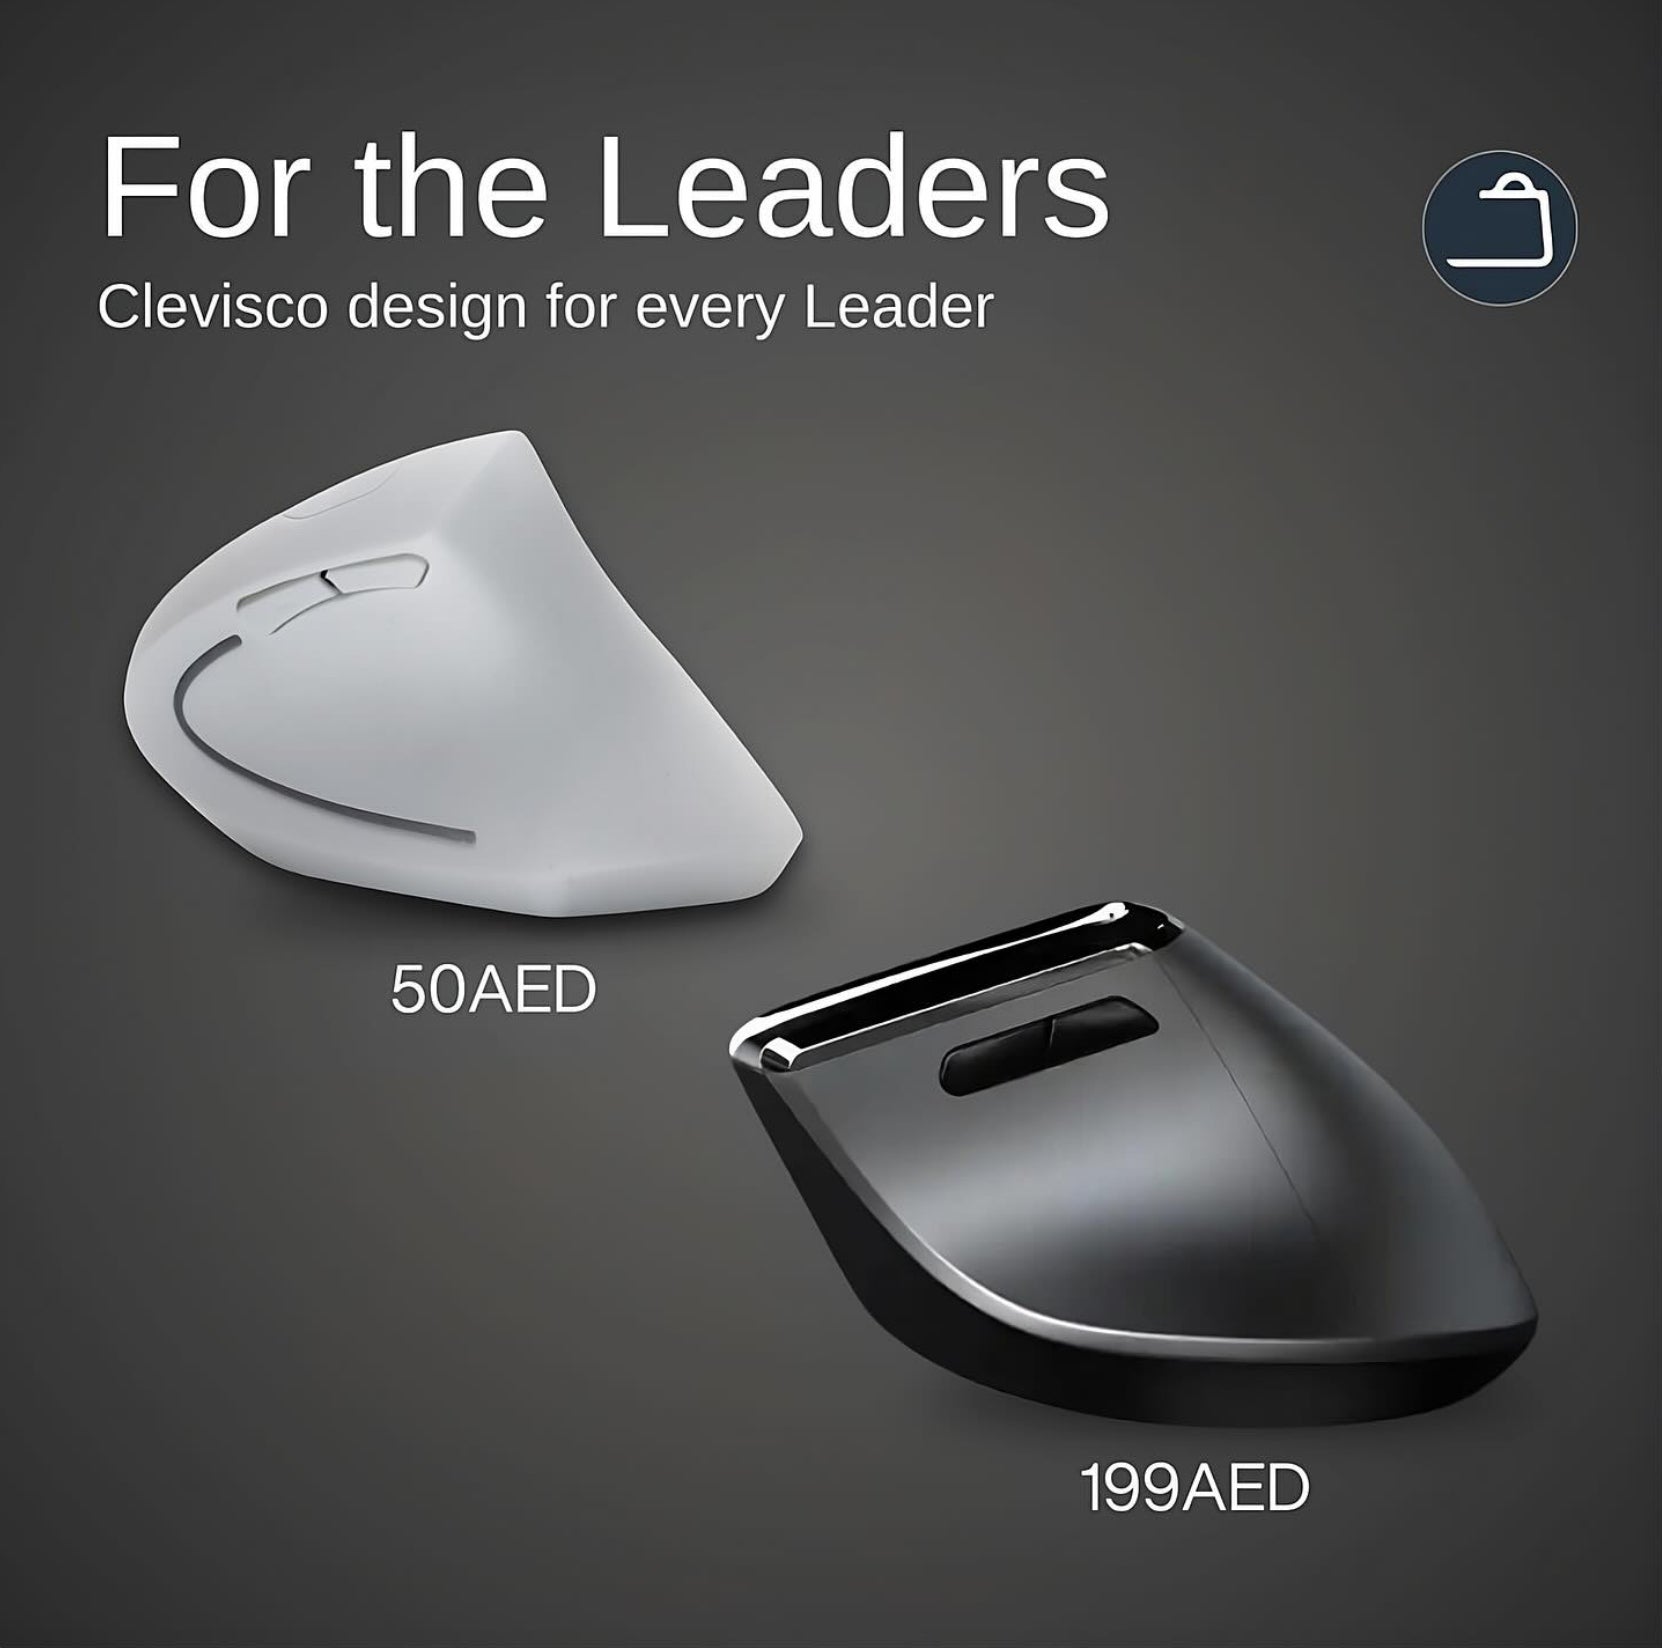 Two Ergonomic mouse produced by Clevisco one for a lower budget with budget materials priced at 50AED and one for higher budget with premium materials priced at 199AED . Text on on the top saying For the leaders, Clevisco design for every leader.